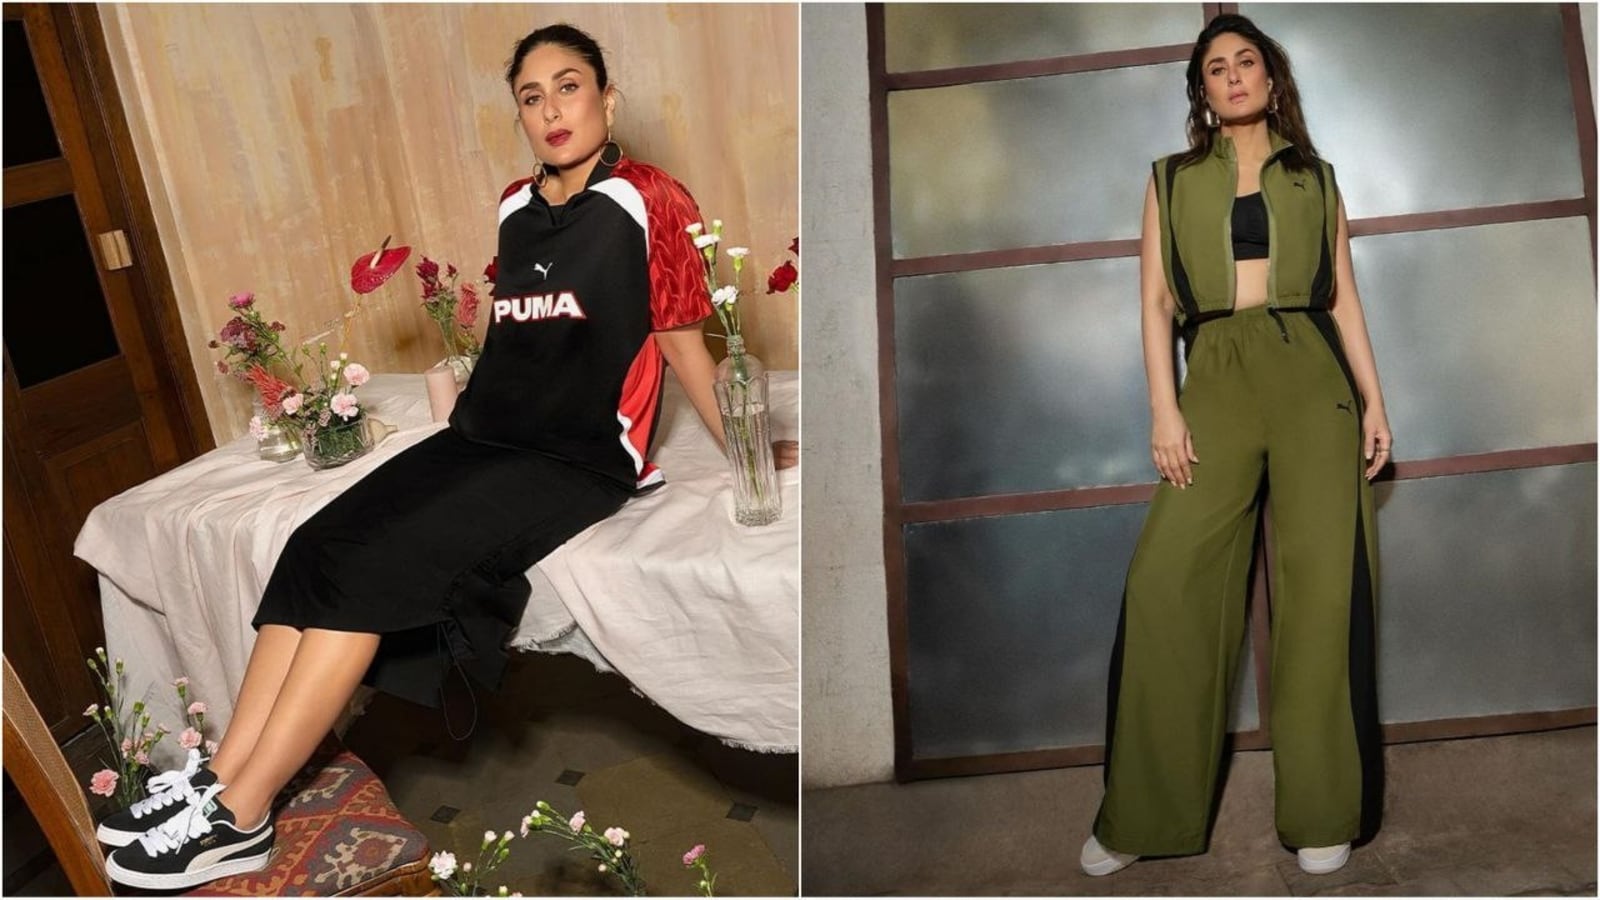 Kareena Kapoor elevates athleisure wear to new heights with effortlessly stylish ensembles. Check out her photos